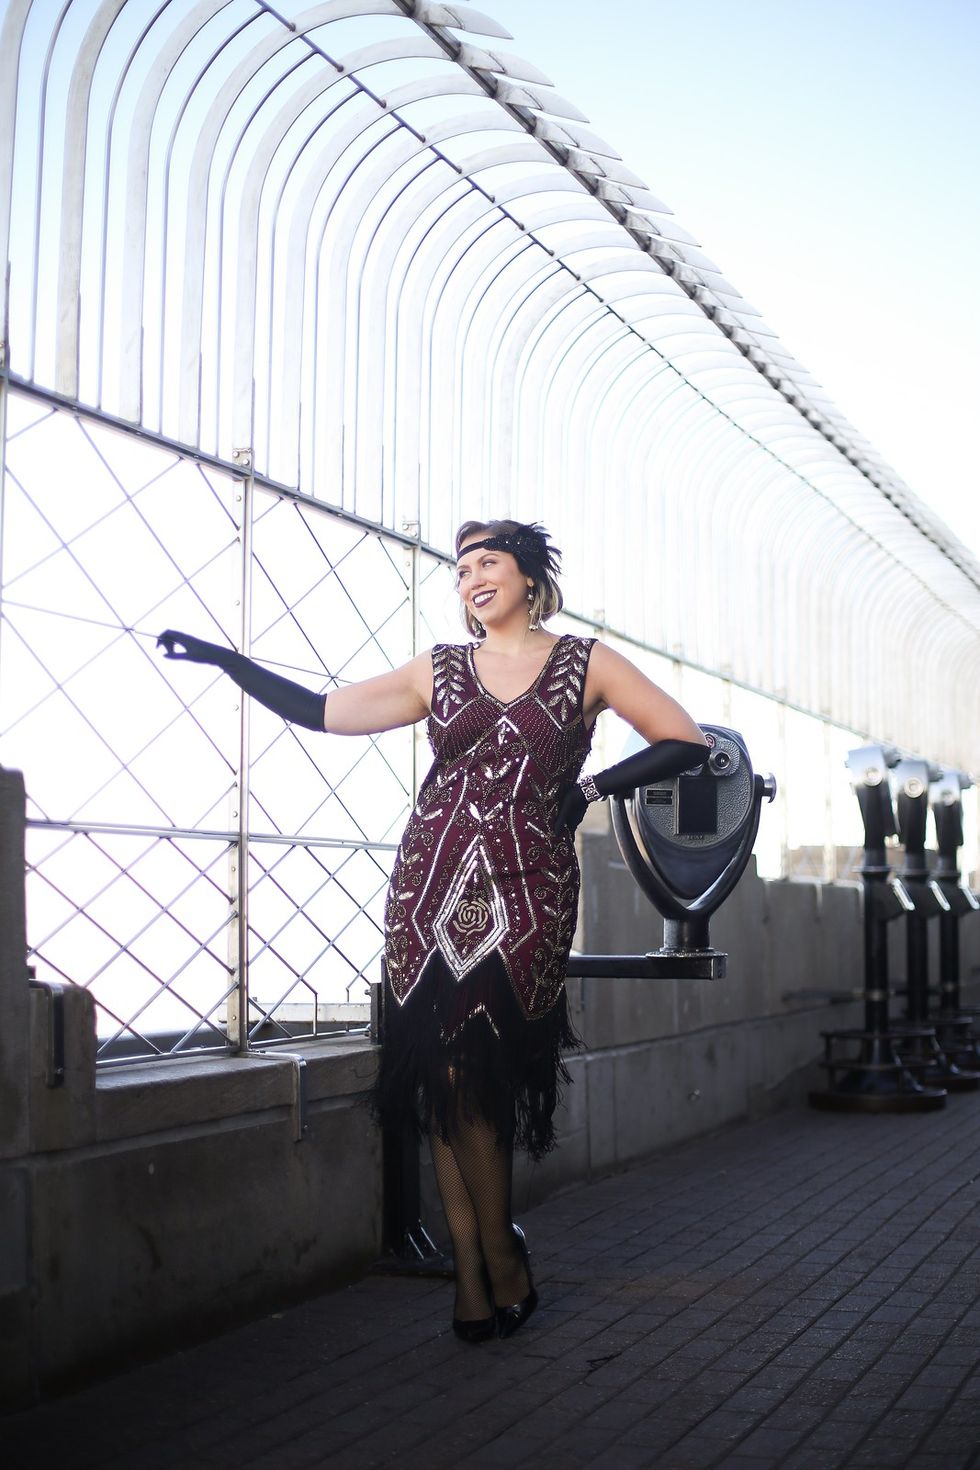 woman standing on skyscraper with mesh gate and viewfinder she is wearing 1920s attire with a black, beaded dress, long black gloves and a feathered black headband